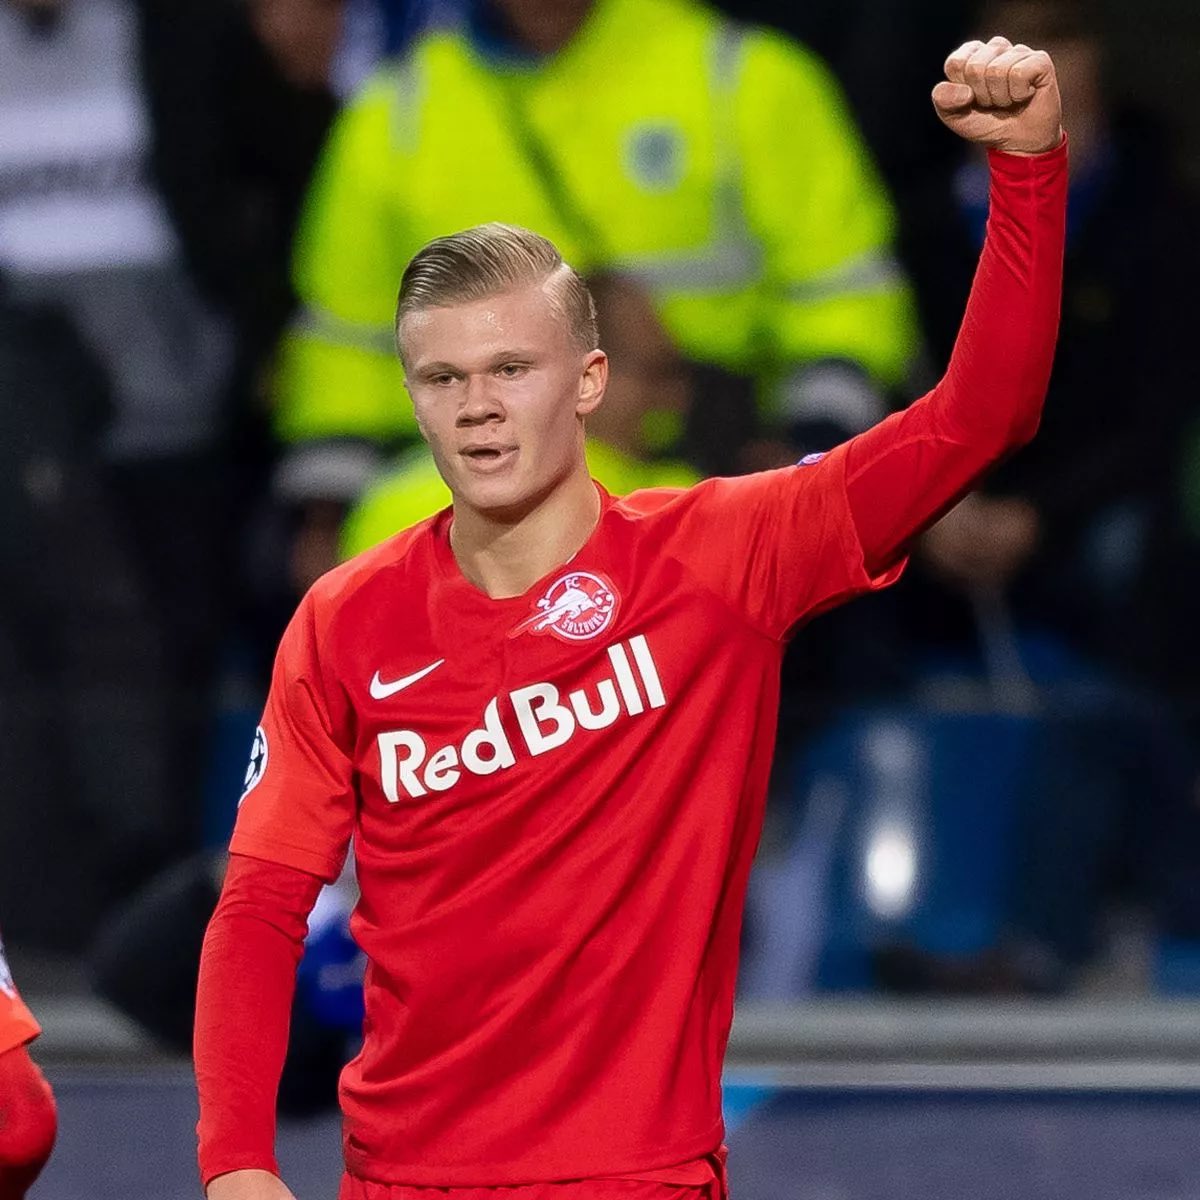 🇳🇴 Napoli president de Laurentiis: “I was on the verge of signing Erling Haaland for €50m from Salzburg”.

“The official proposal was ready but Mino Raiola told me: please, don’t try to sign Erling as I already planned his next move”.